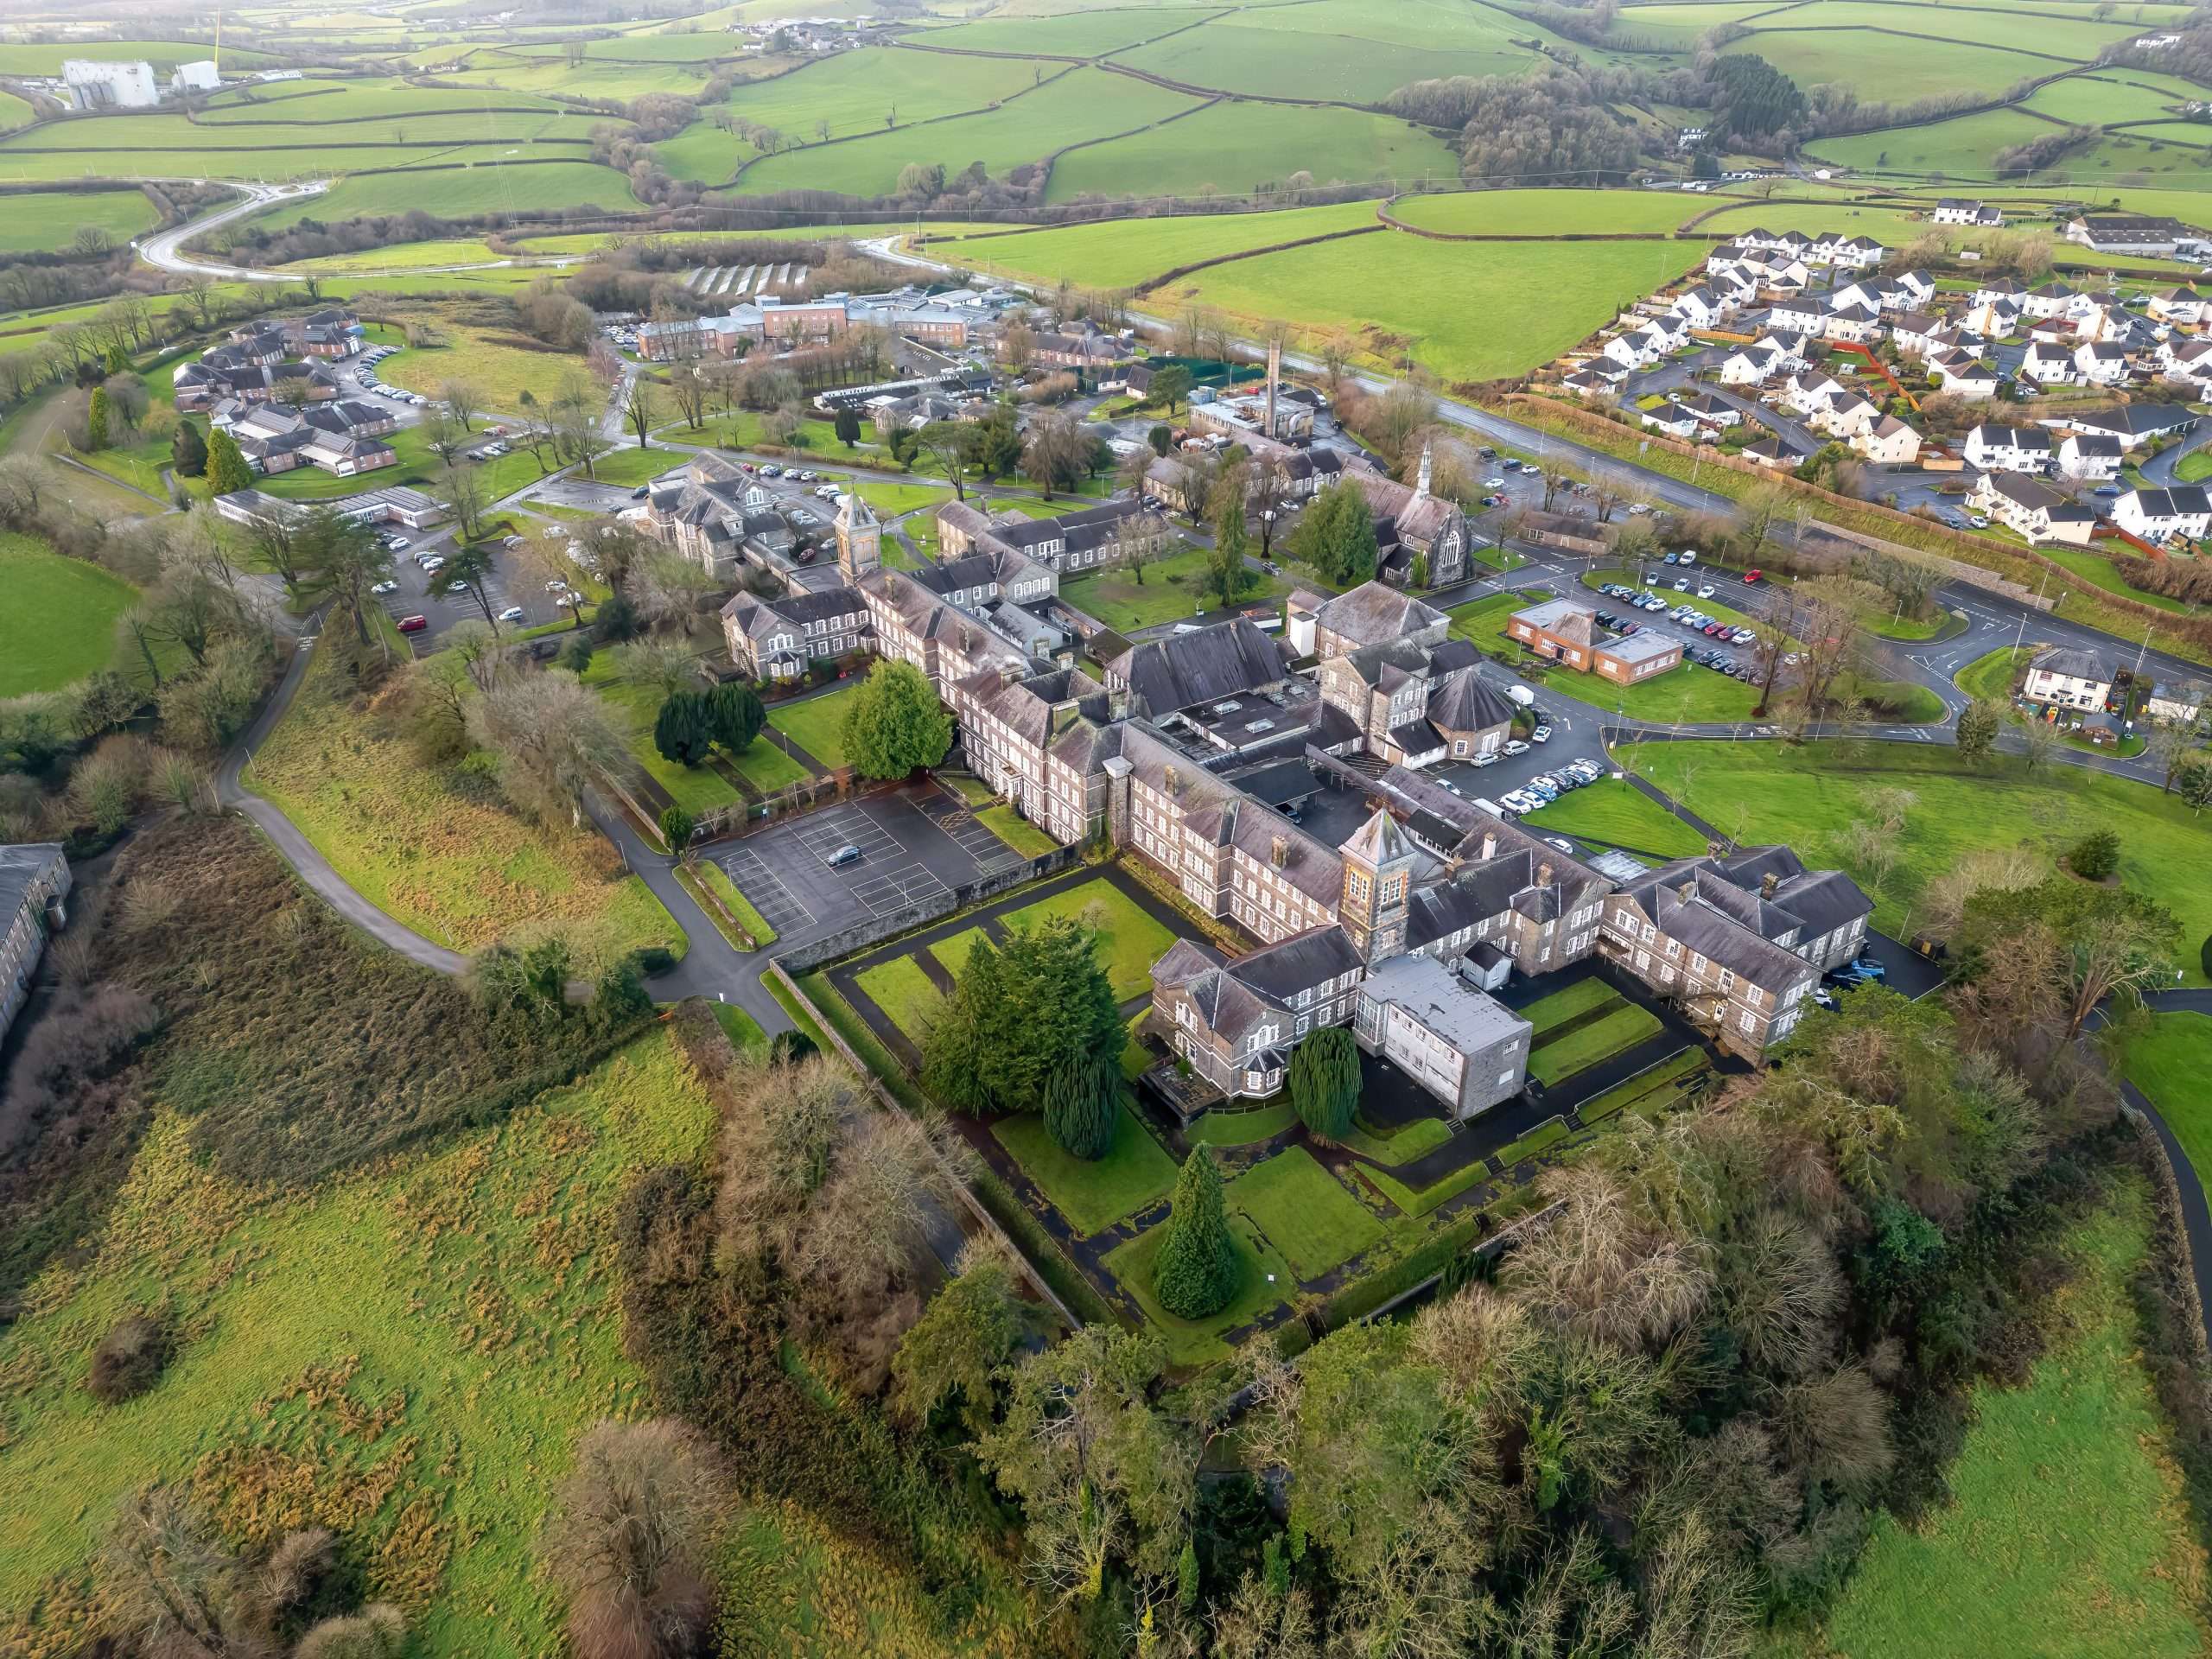 Former Victorian asylum in Carmarthen could see new lease of life